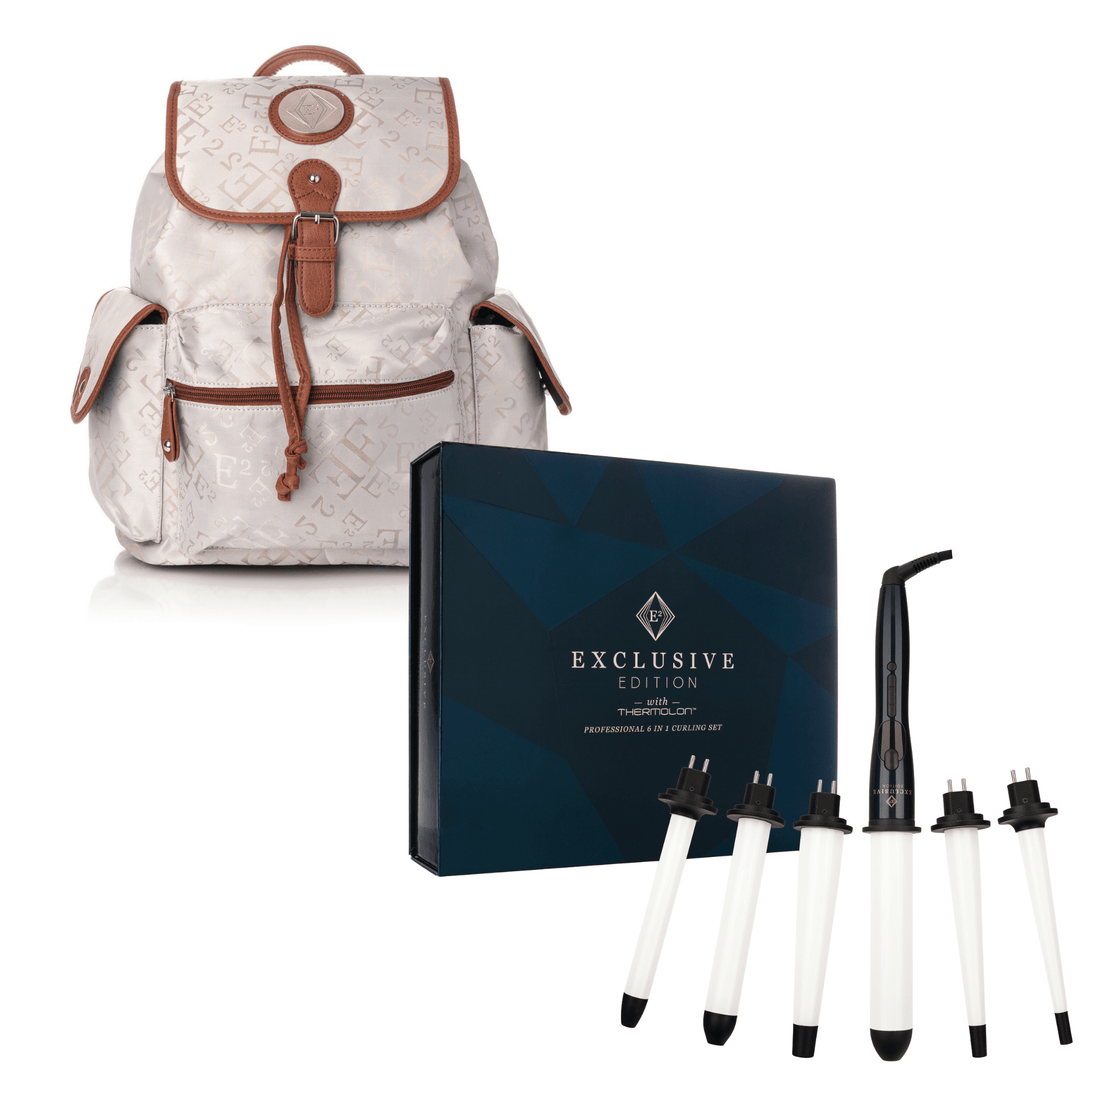 Exclusive Edition 6-in-1 Thermolon Beach Waves Curling System with Backpack